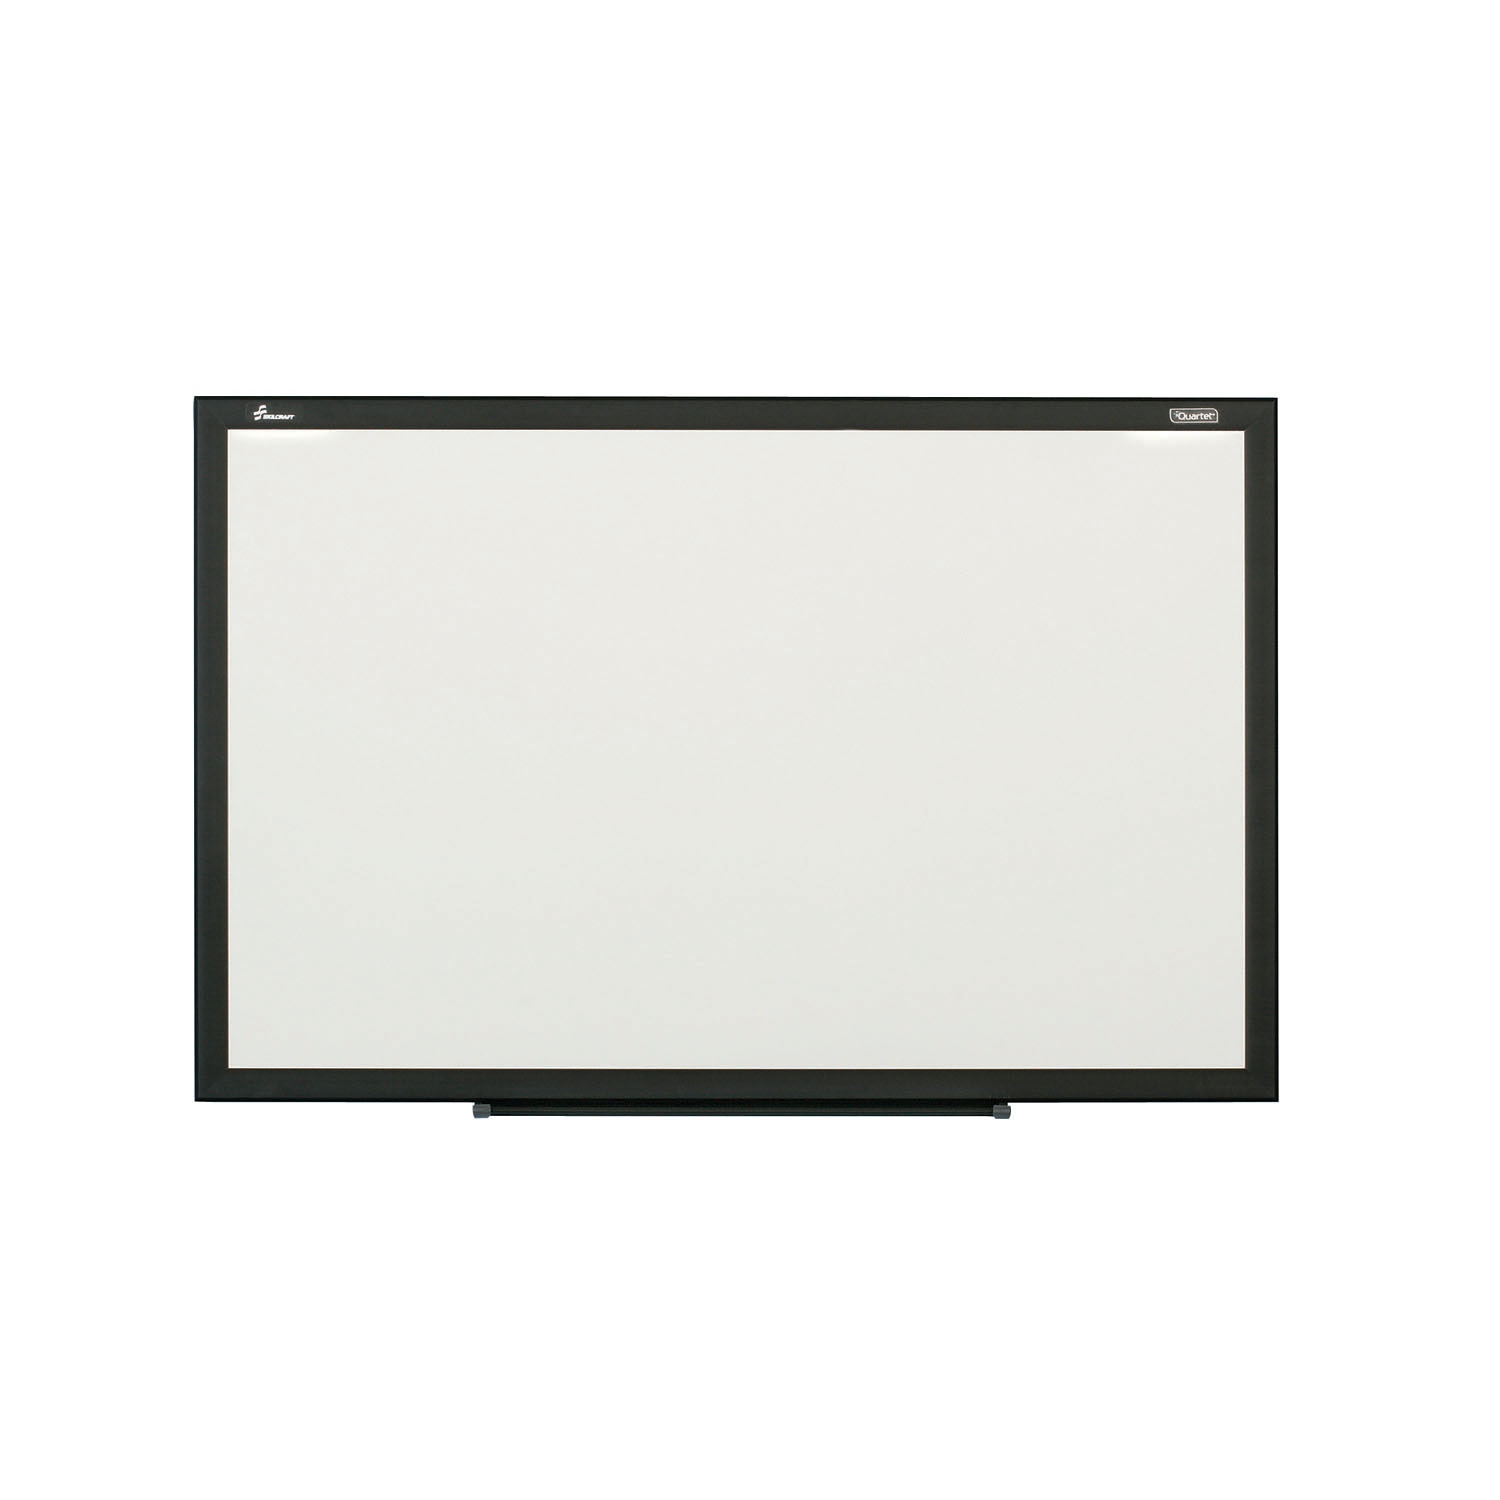 Dry Erase Whiteboard, Magnetic Painted Steel Surface, Brushed Silver Aluminum Frame, 4 x 3